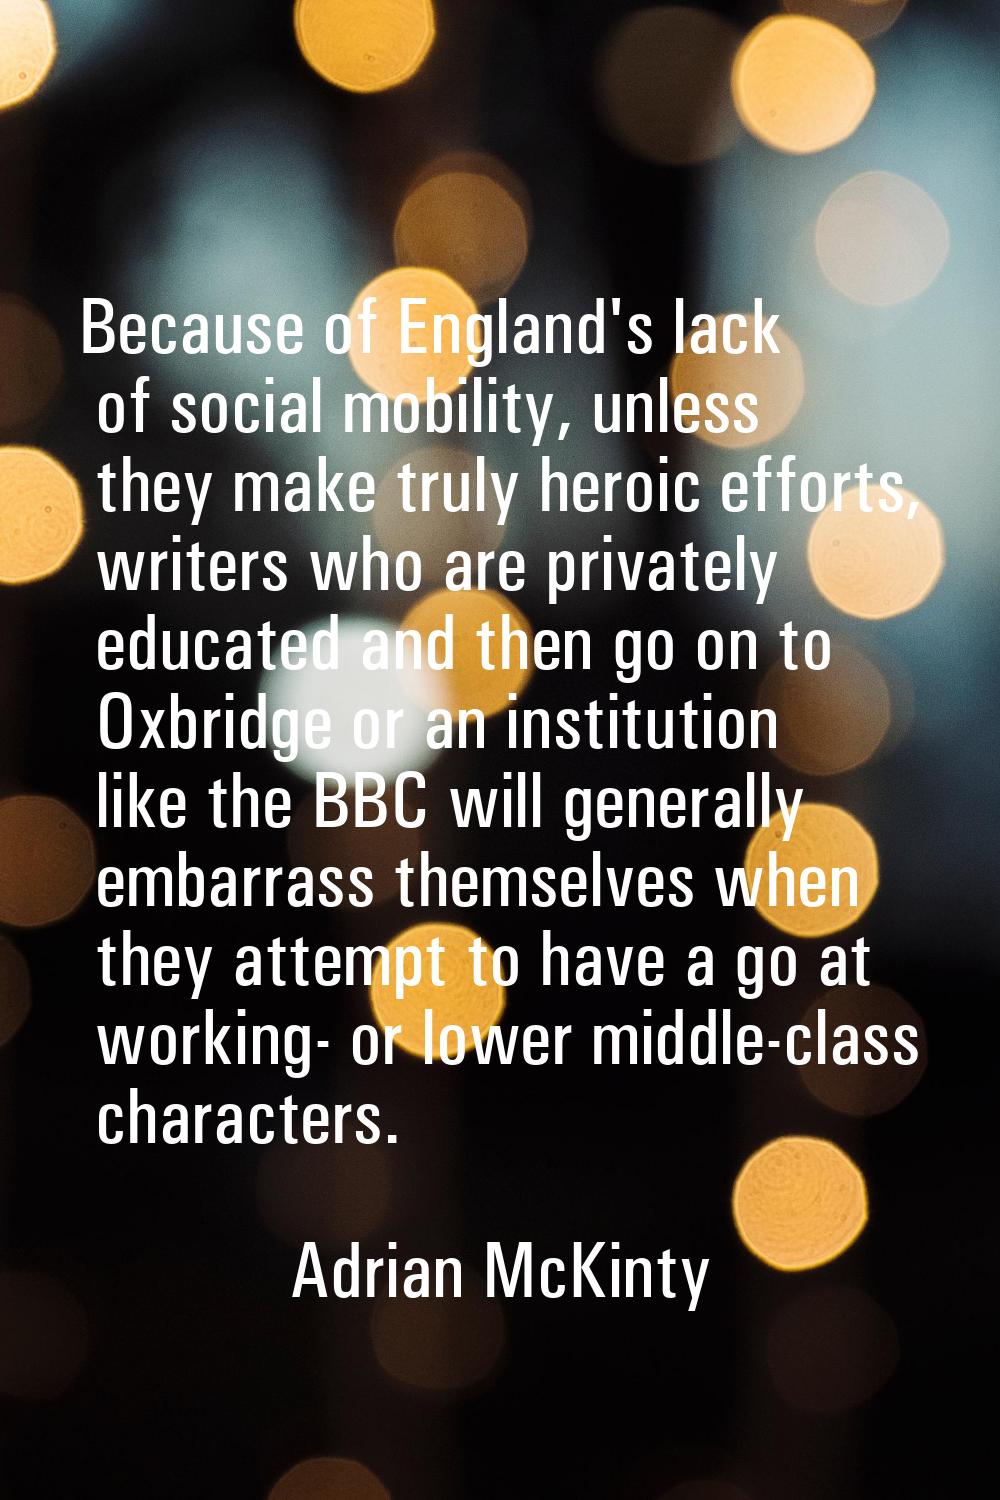 Because of England's lack of social mobility, unless they make truly heroic efforts, writers who ar